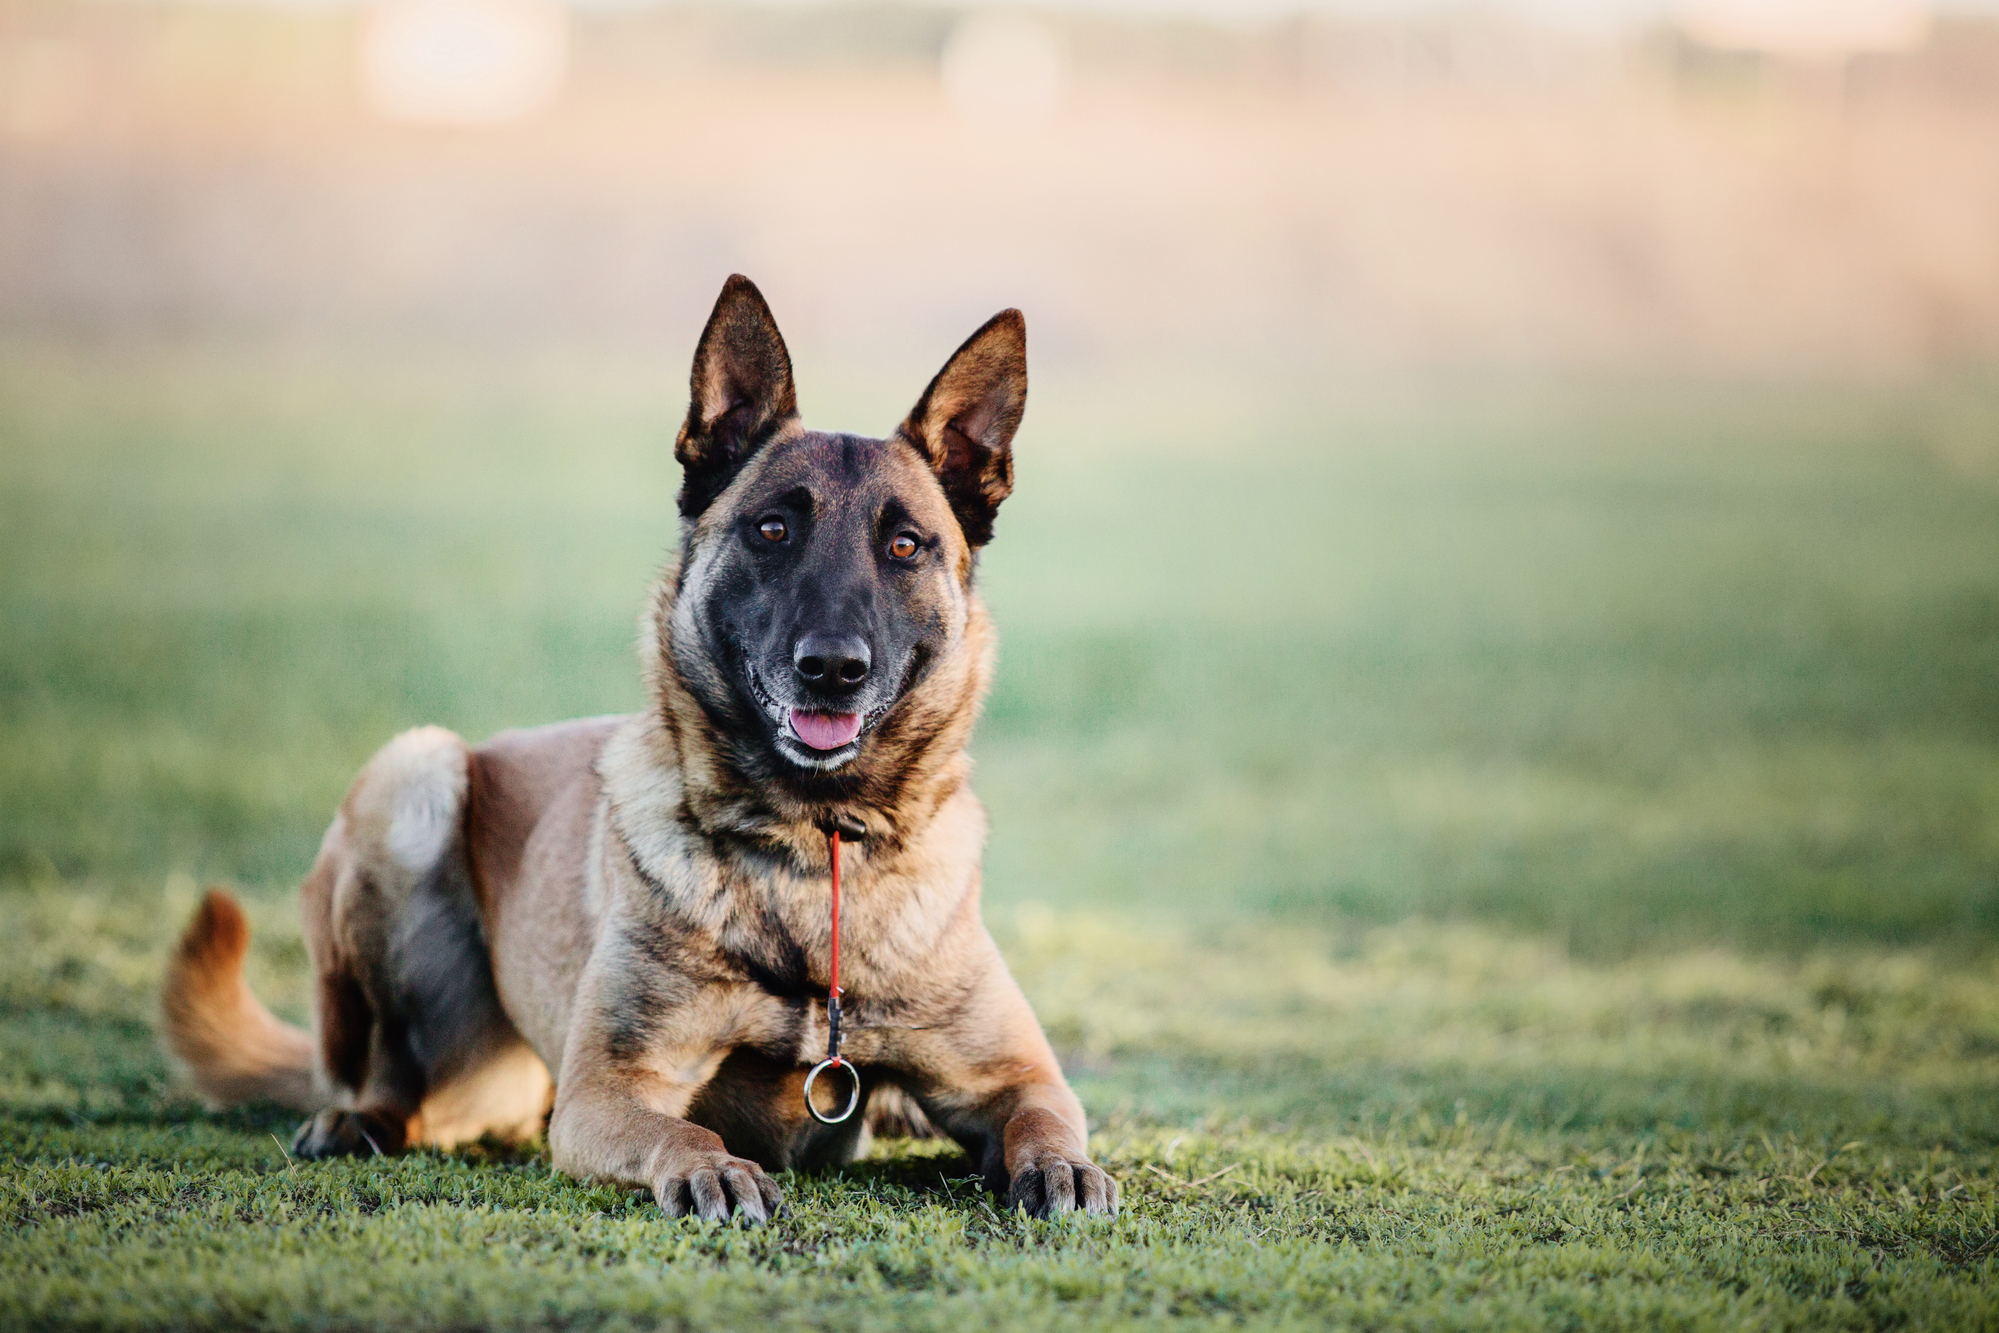 Alert protection dog, a Belgian Malinois, lying on grass with a focused expression